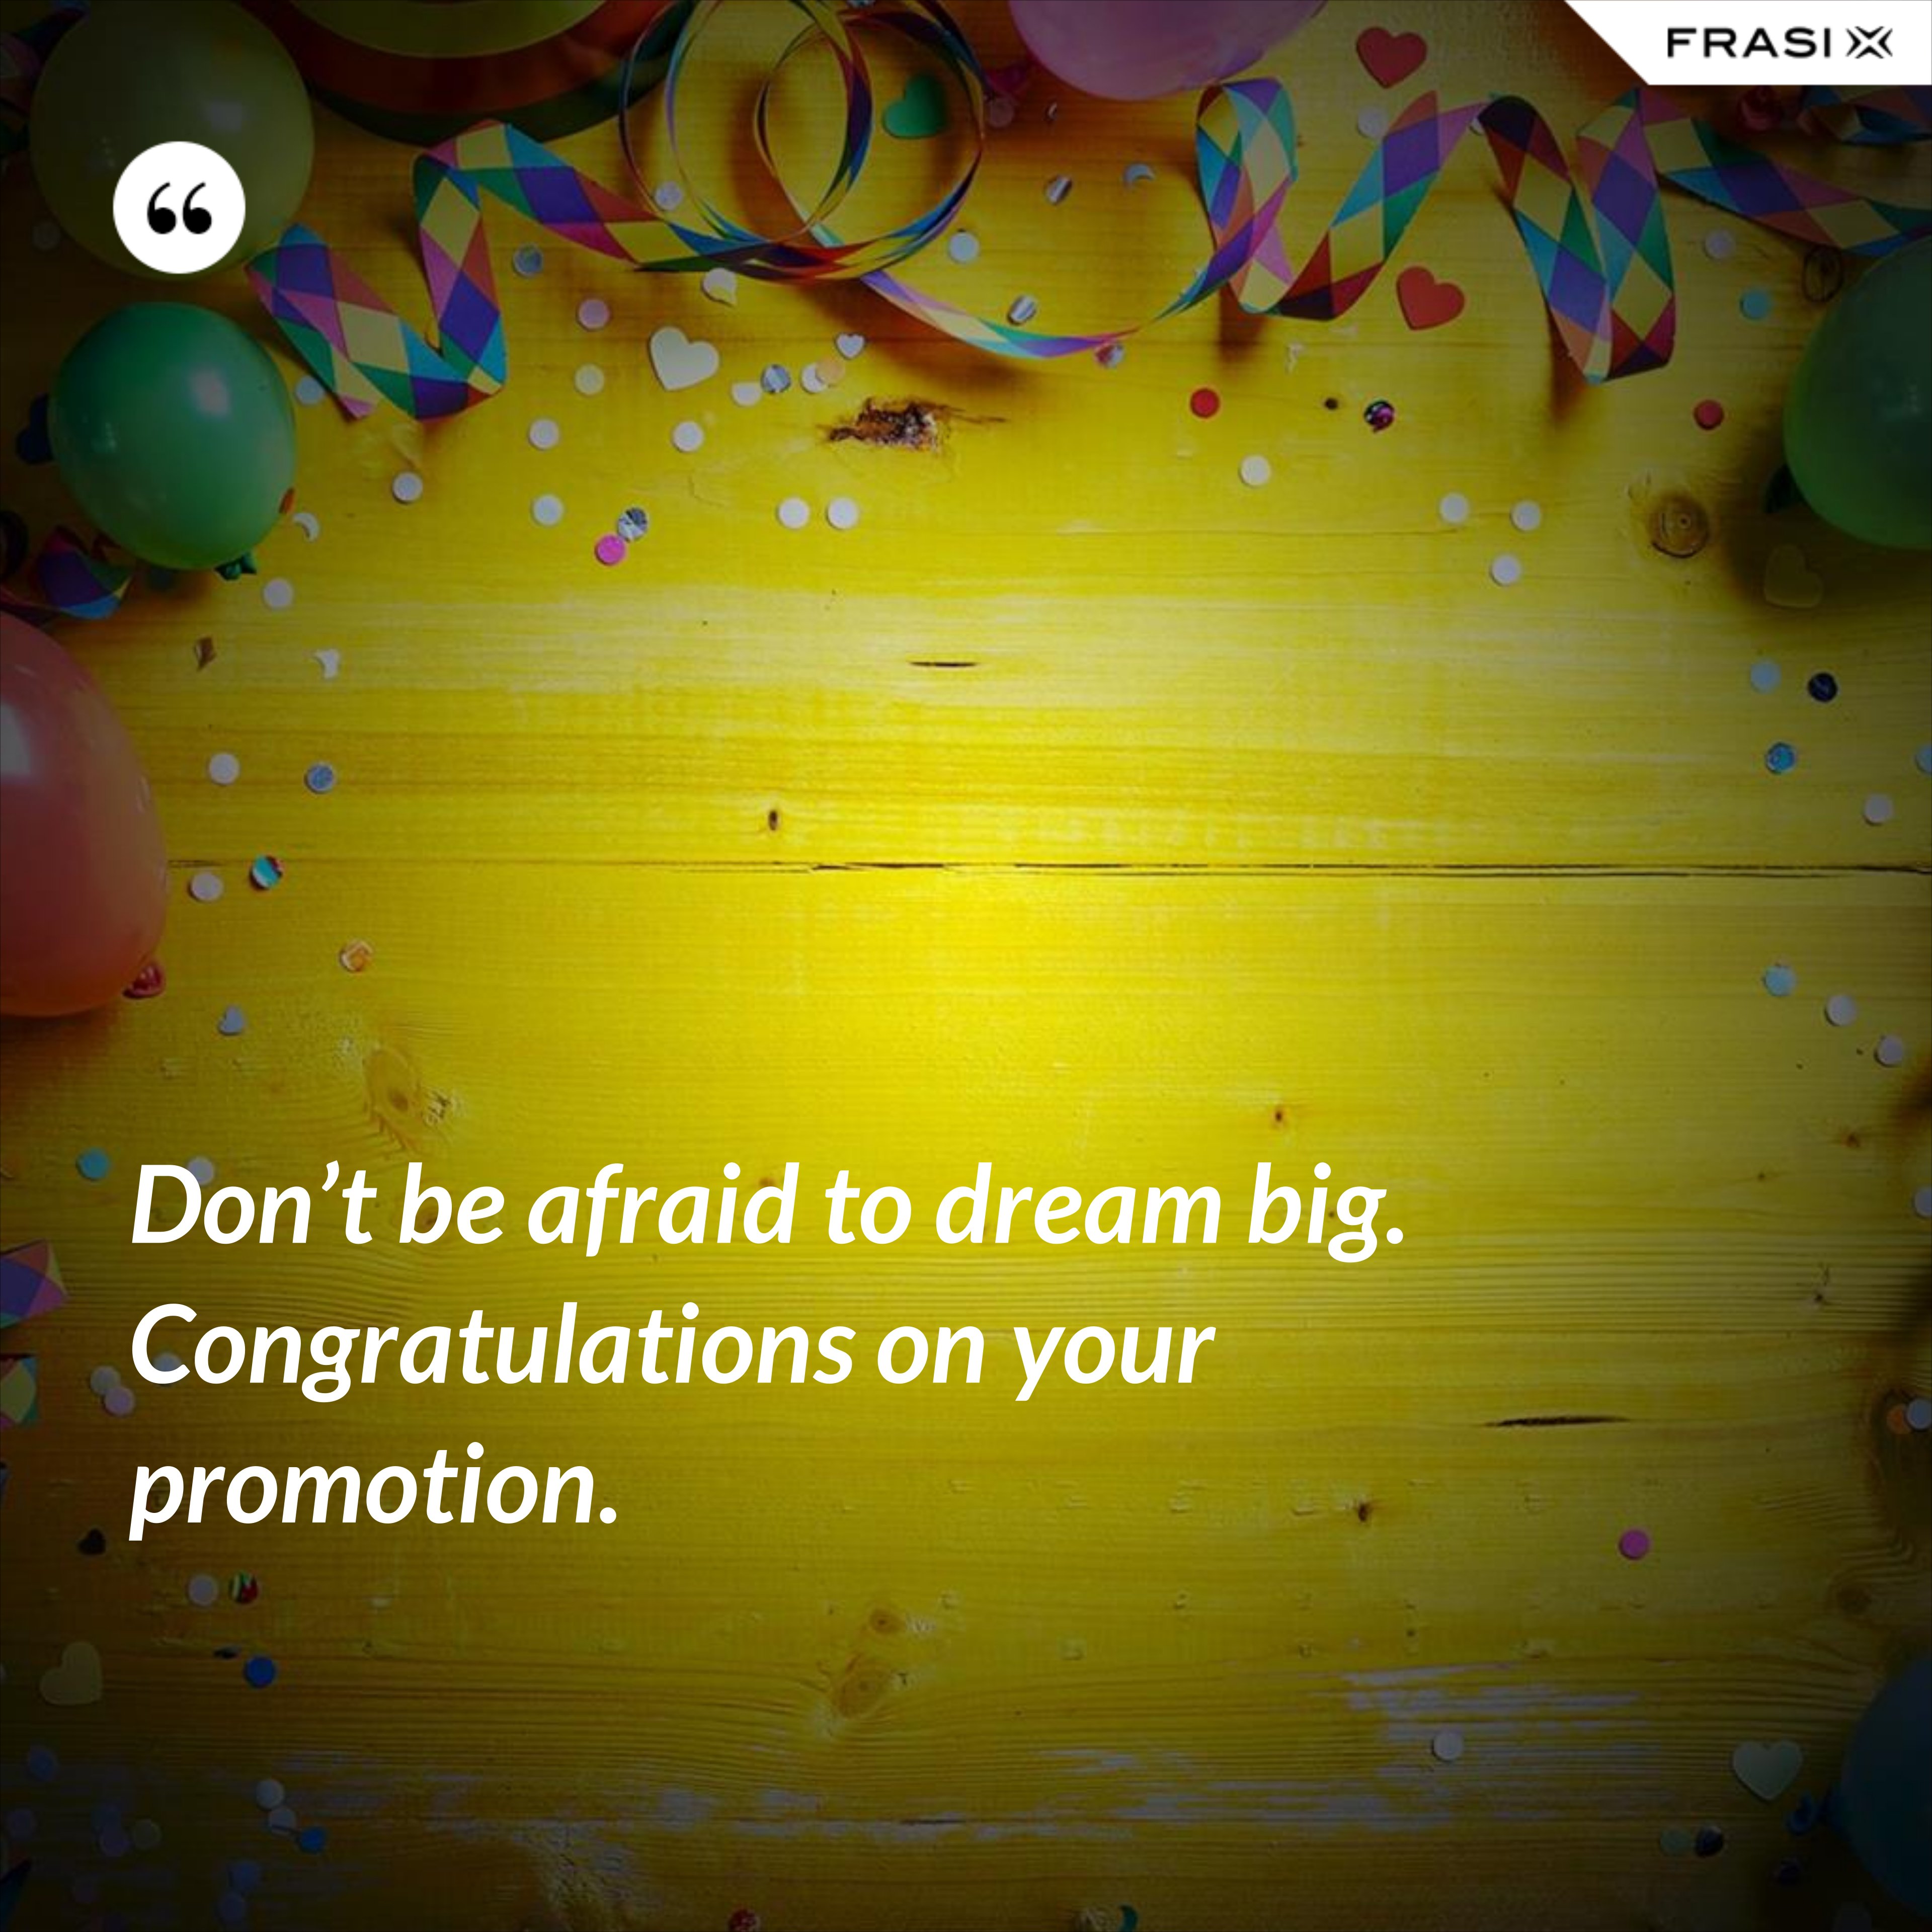 Don’t be afraid to dream big. Congratulations on your promotion. - Anonimo